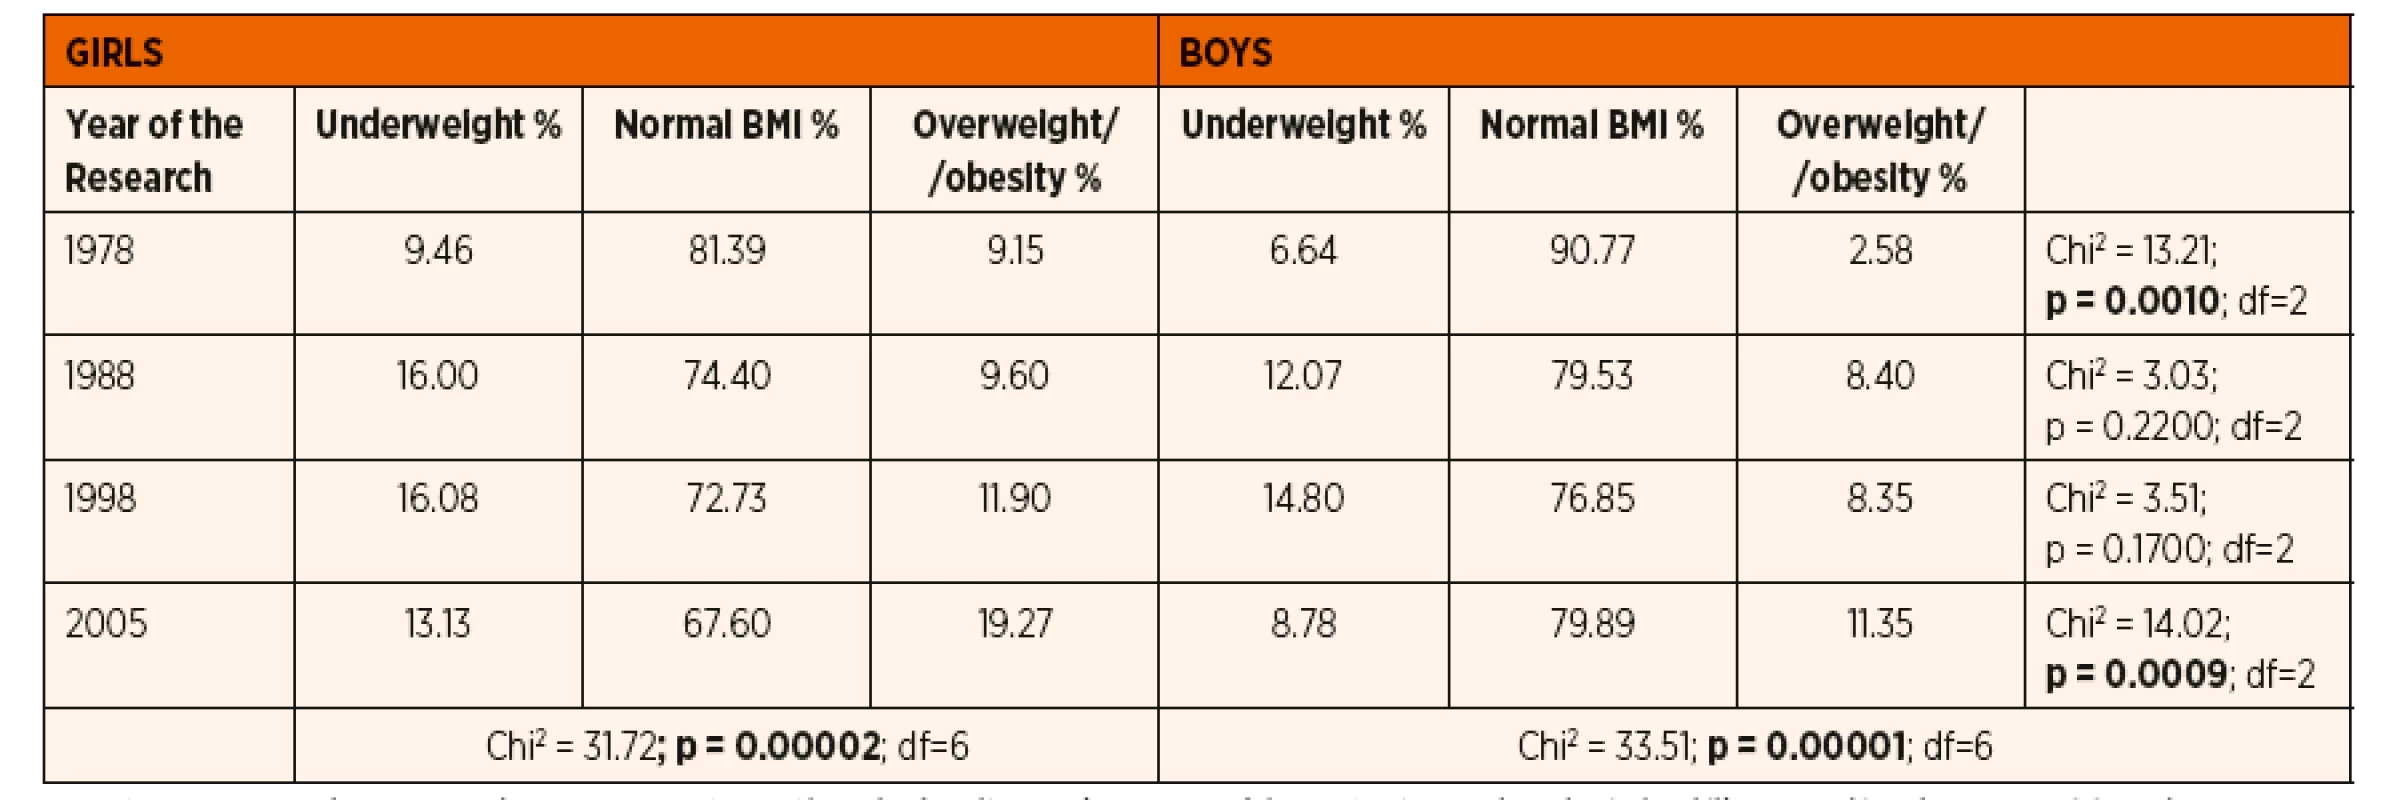 Prevalence (in %) of underweight, normal BMI, overweight and obesity in children aged 7-9 years by sex and examinated in consecutive years – based on the IOTF definition.